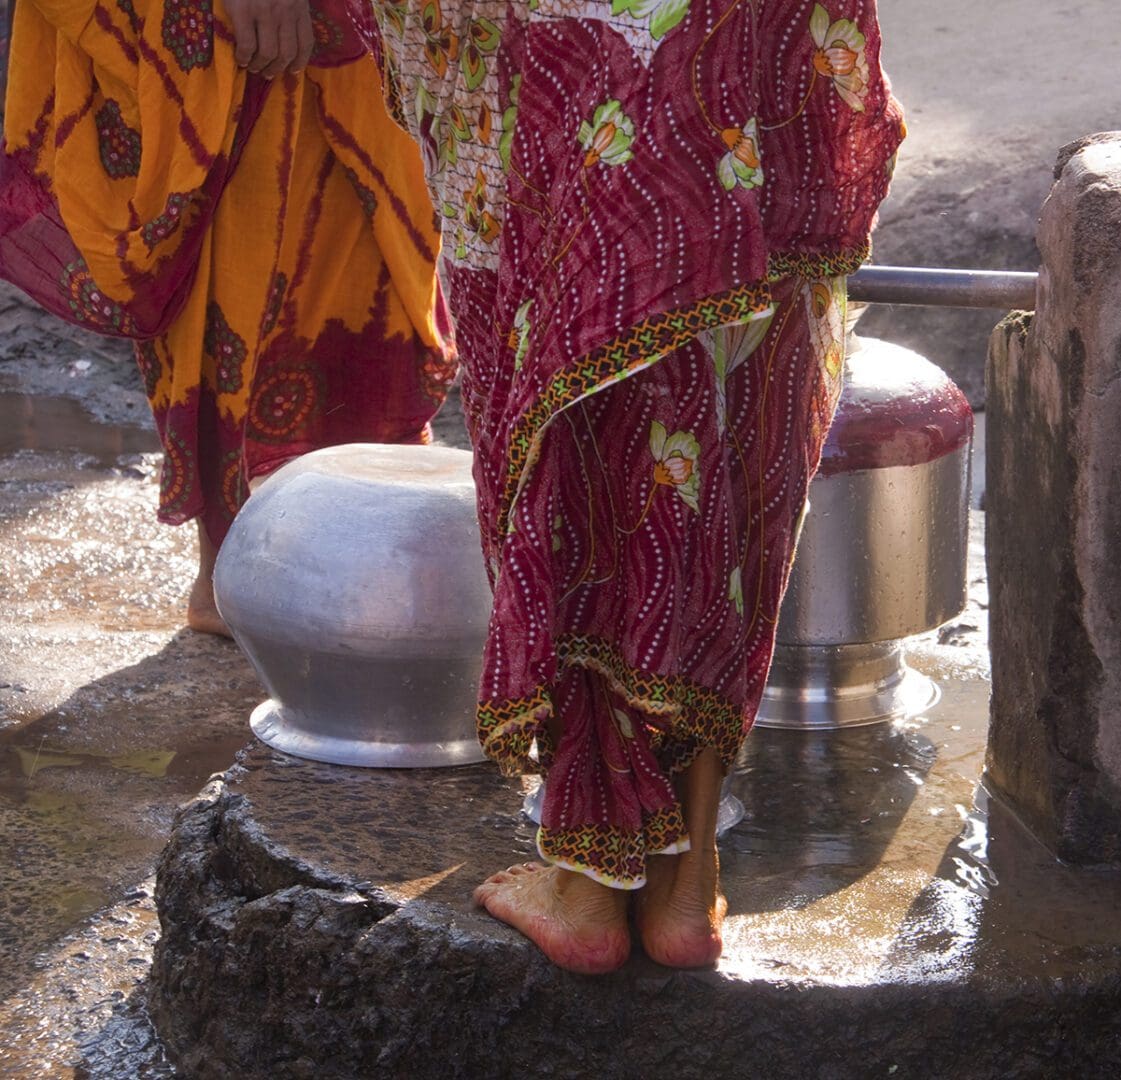 Two women standing next to a water well.